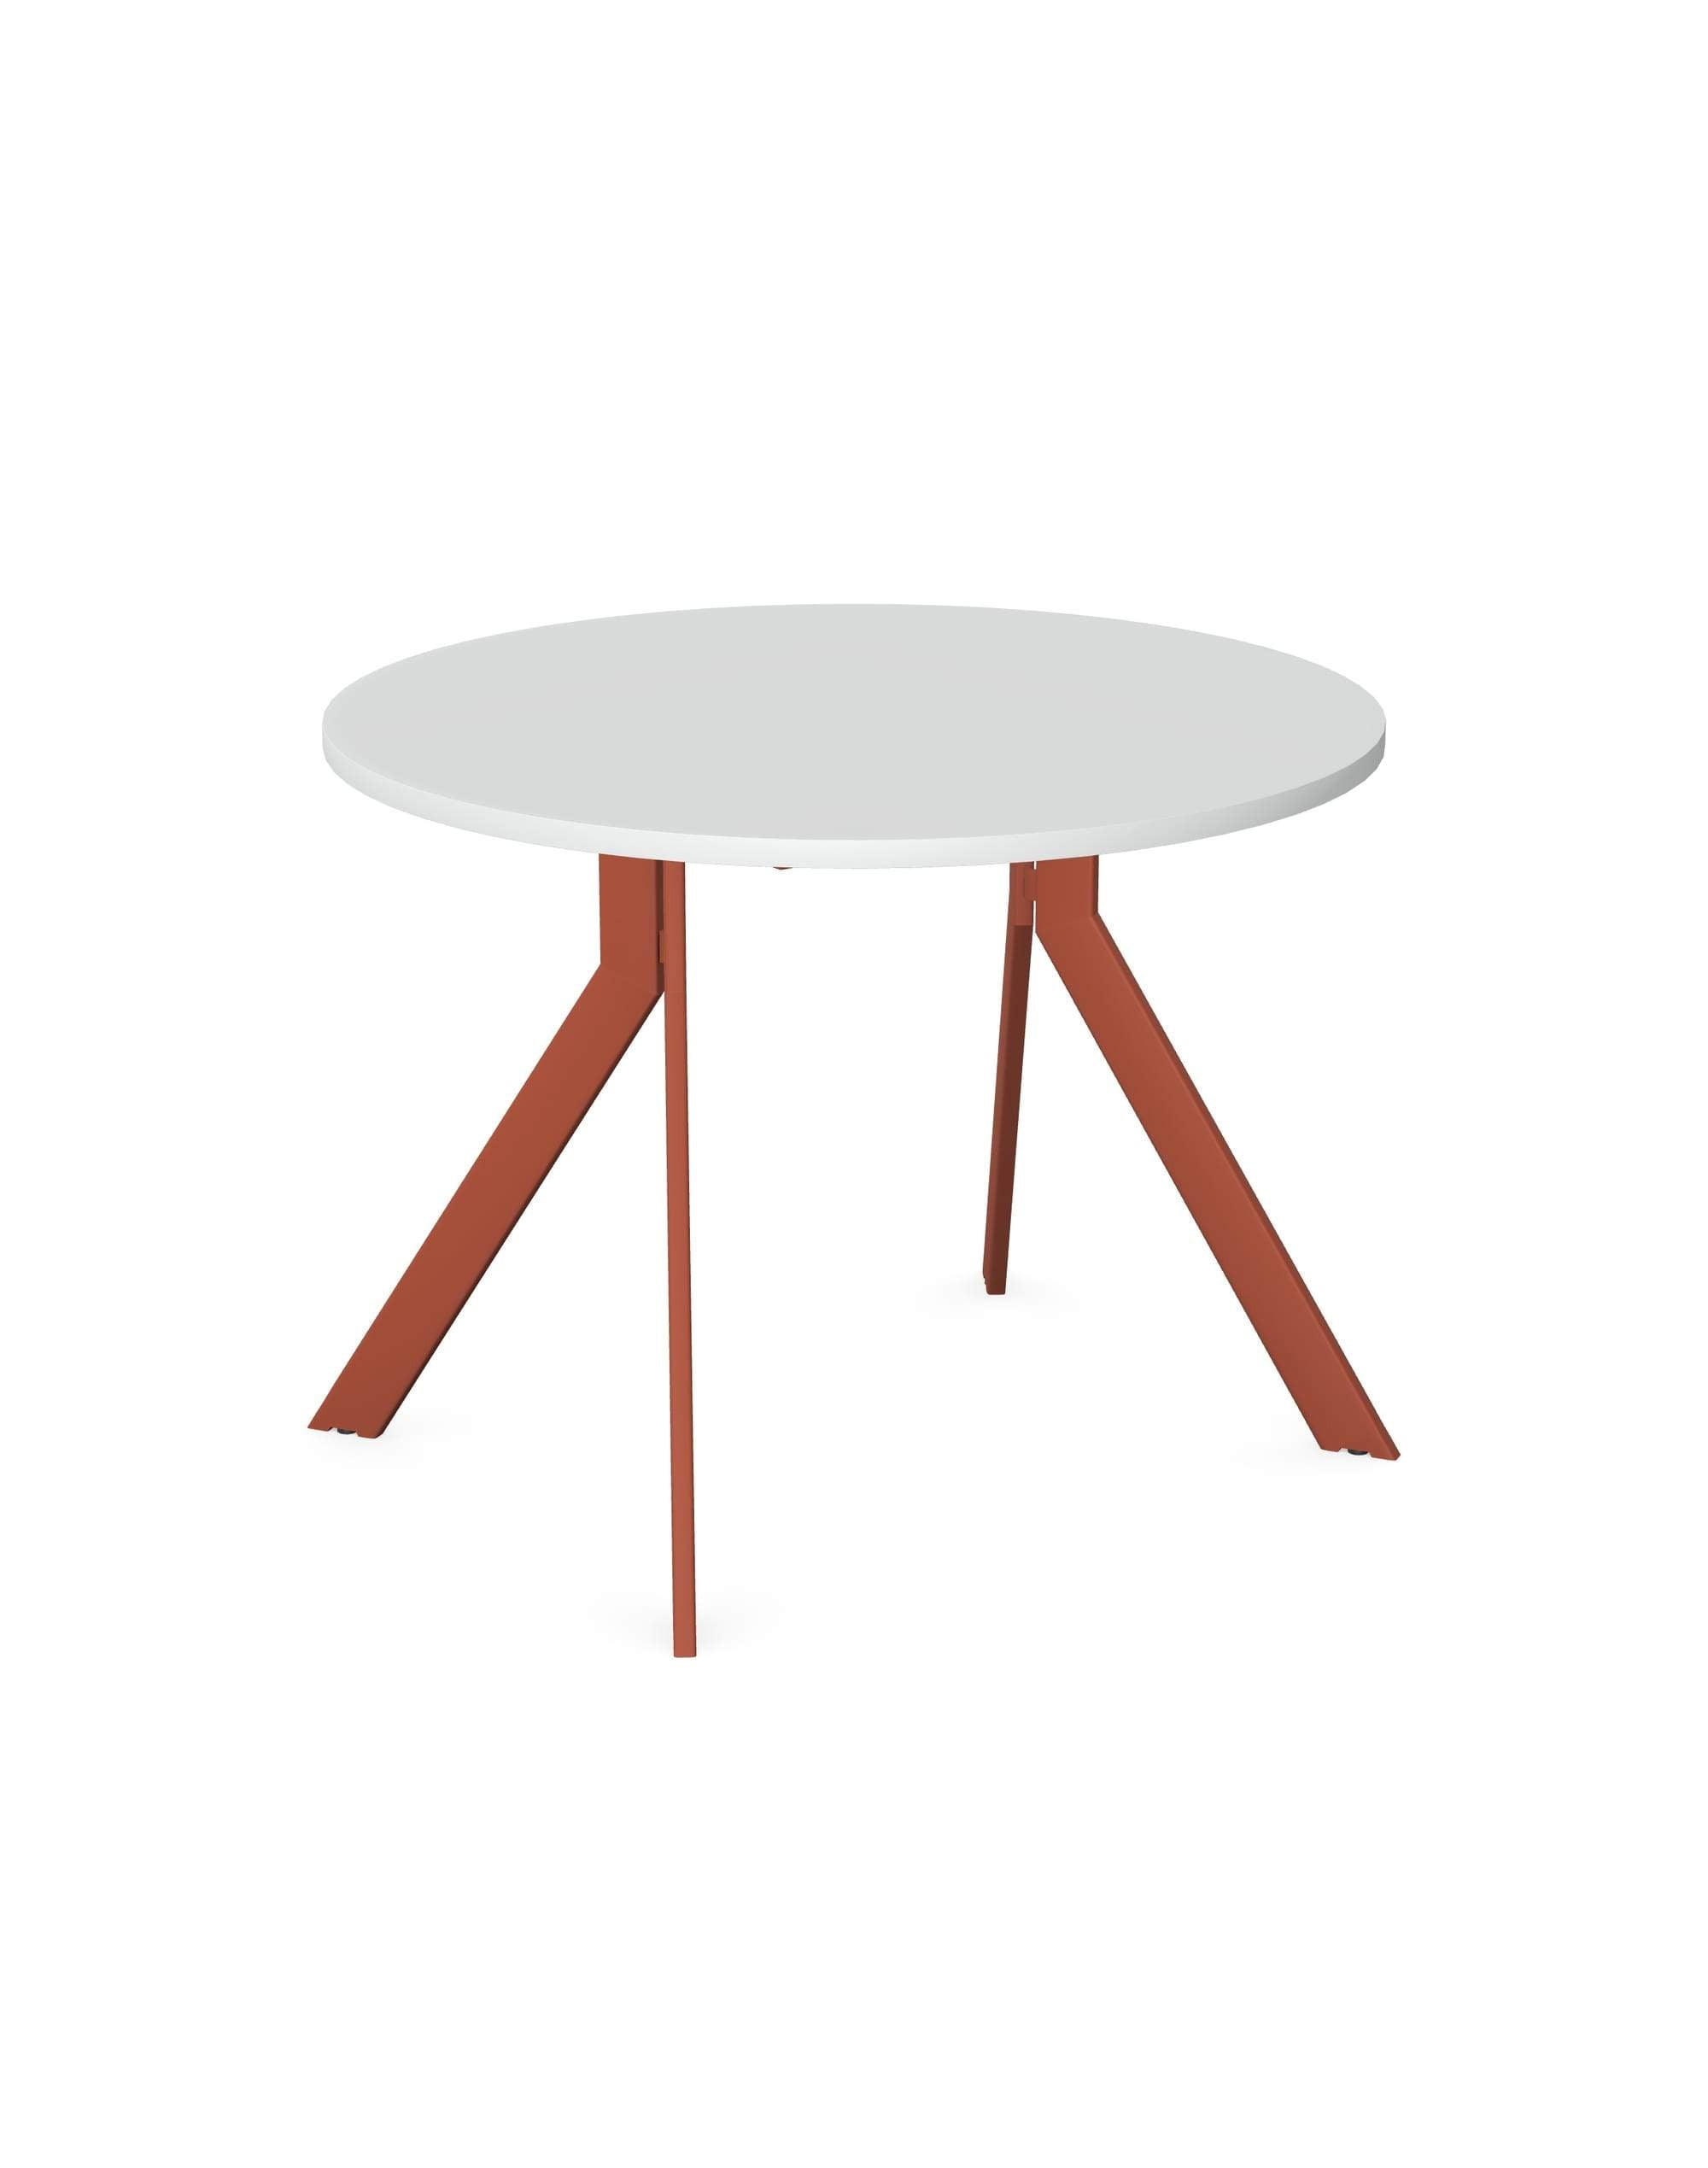 Axy-Line - Occasional Tables, Round Tops, Leg-Y